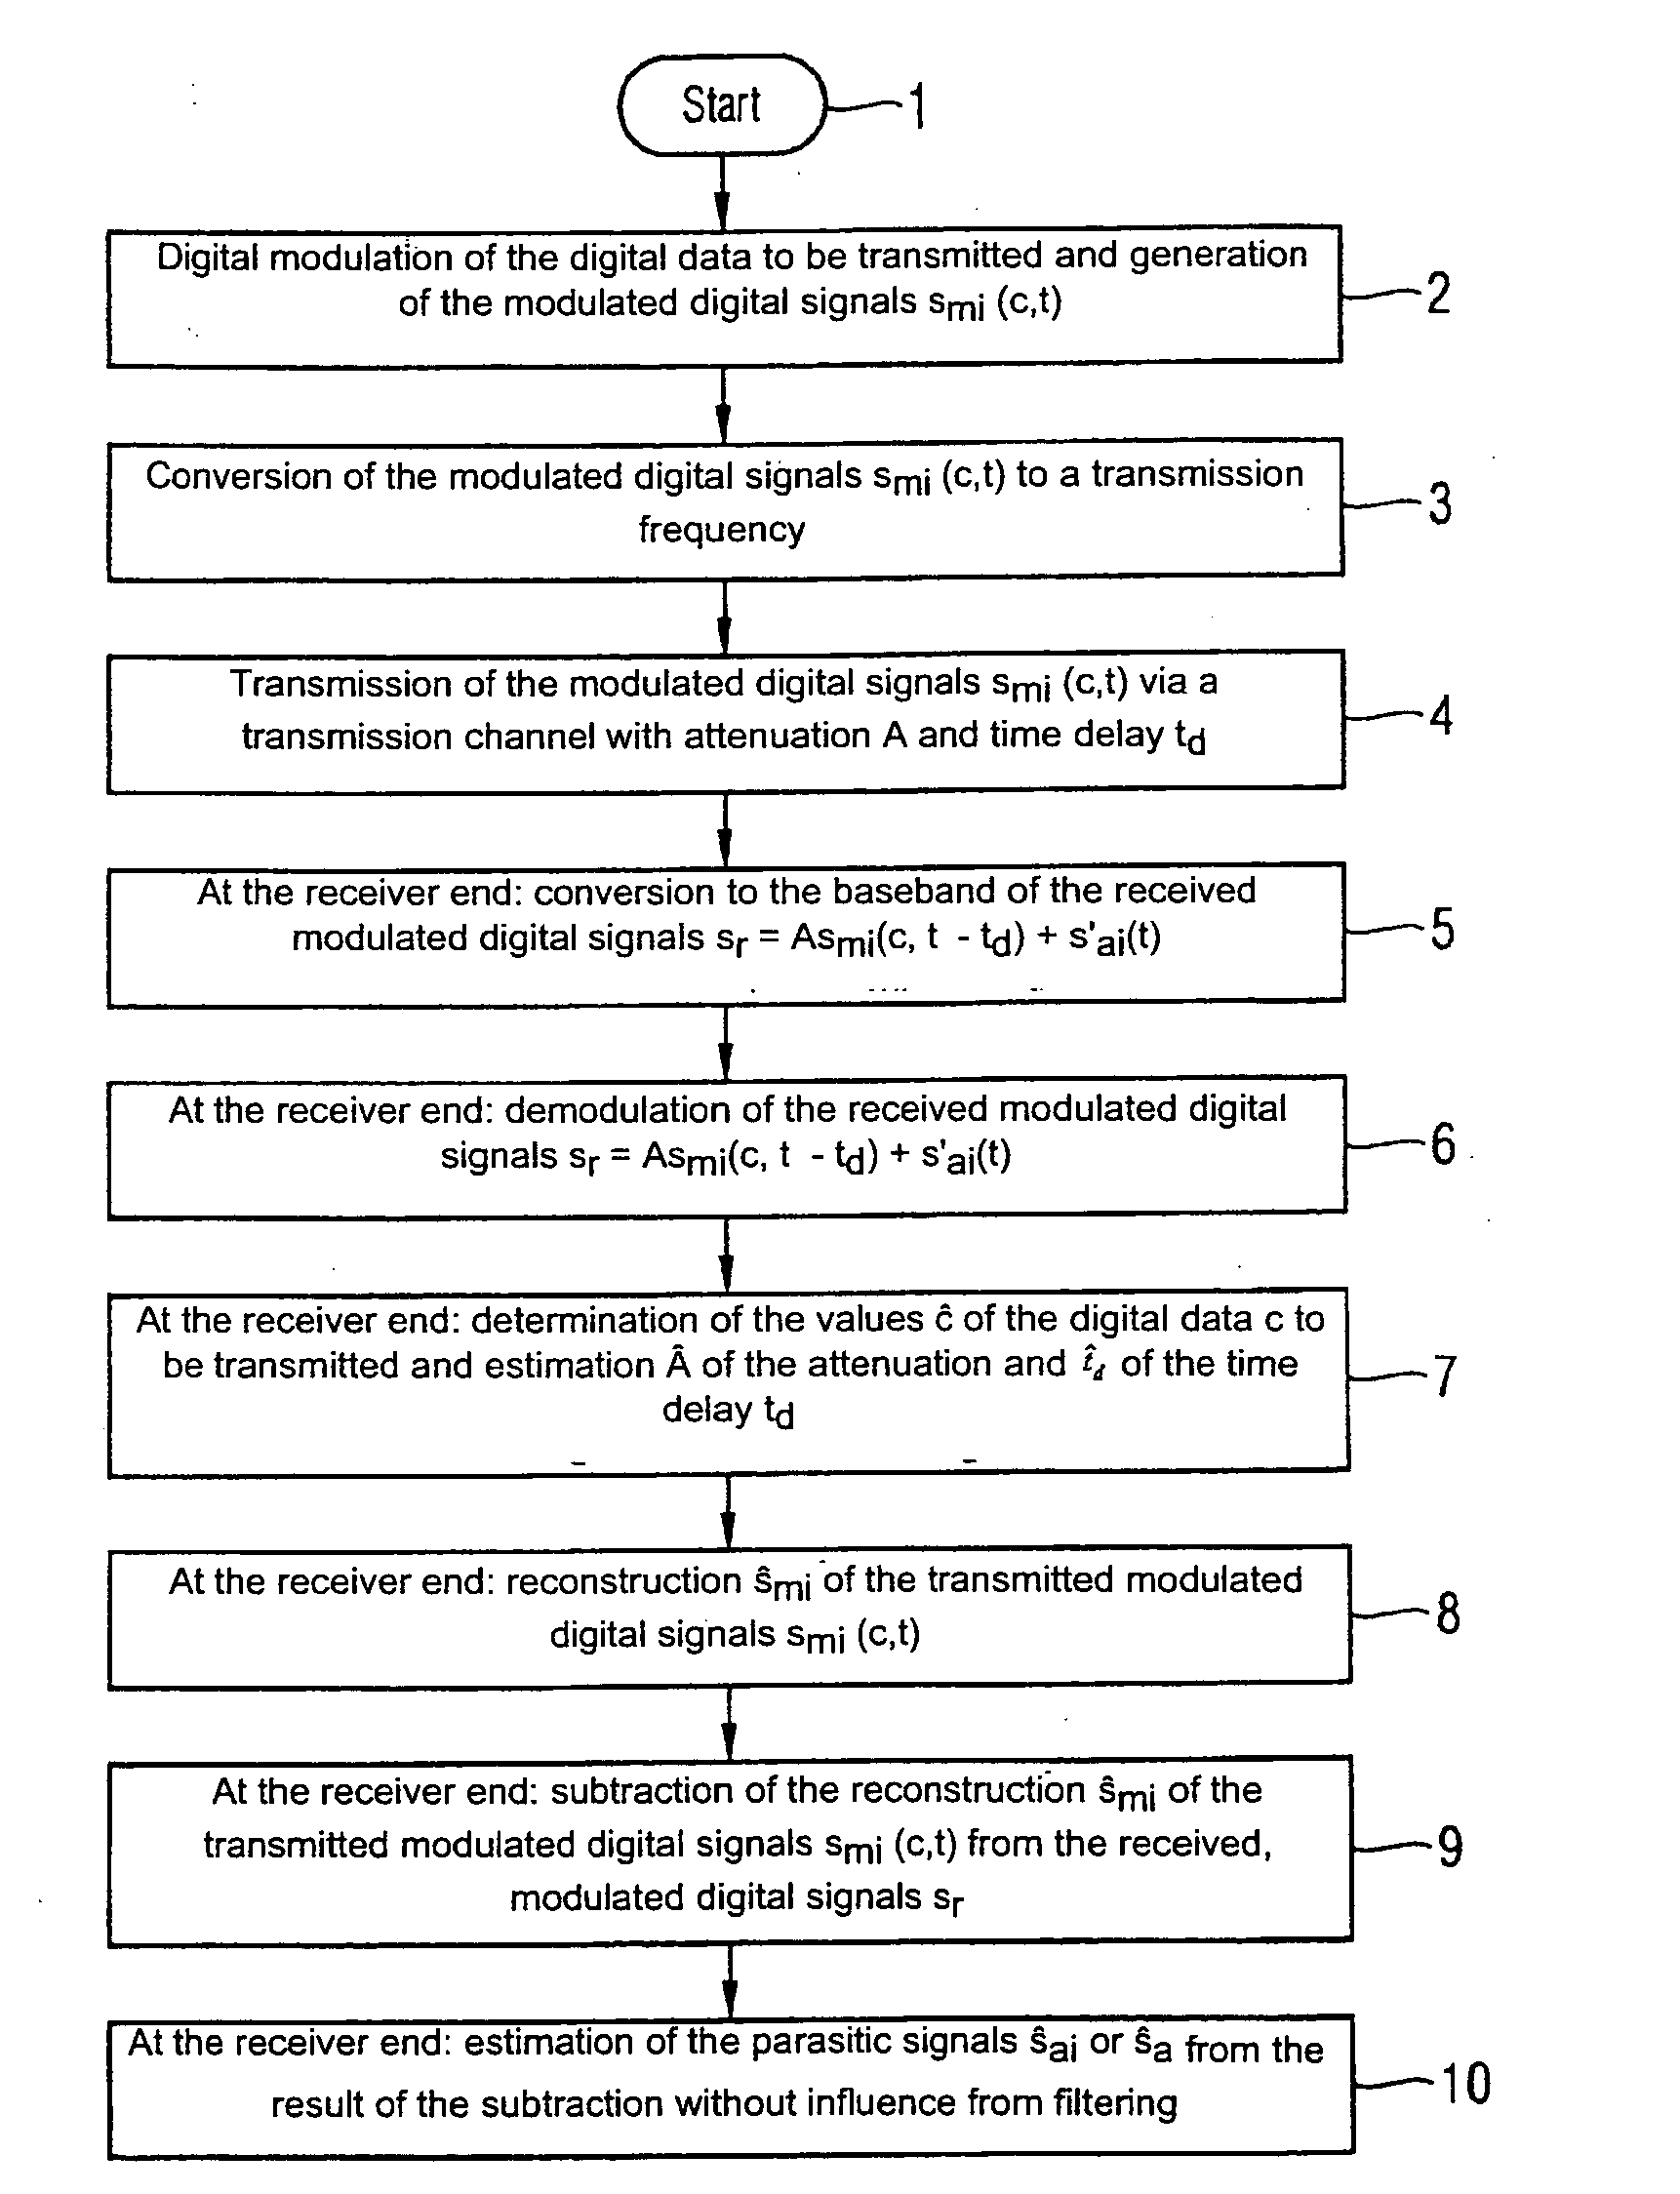 Method for deriving parasitic signals from modulated digital signals